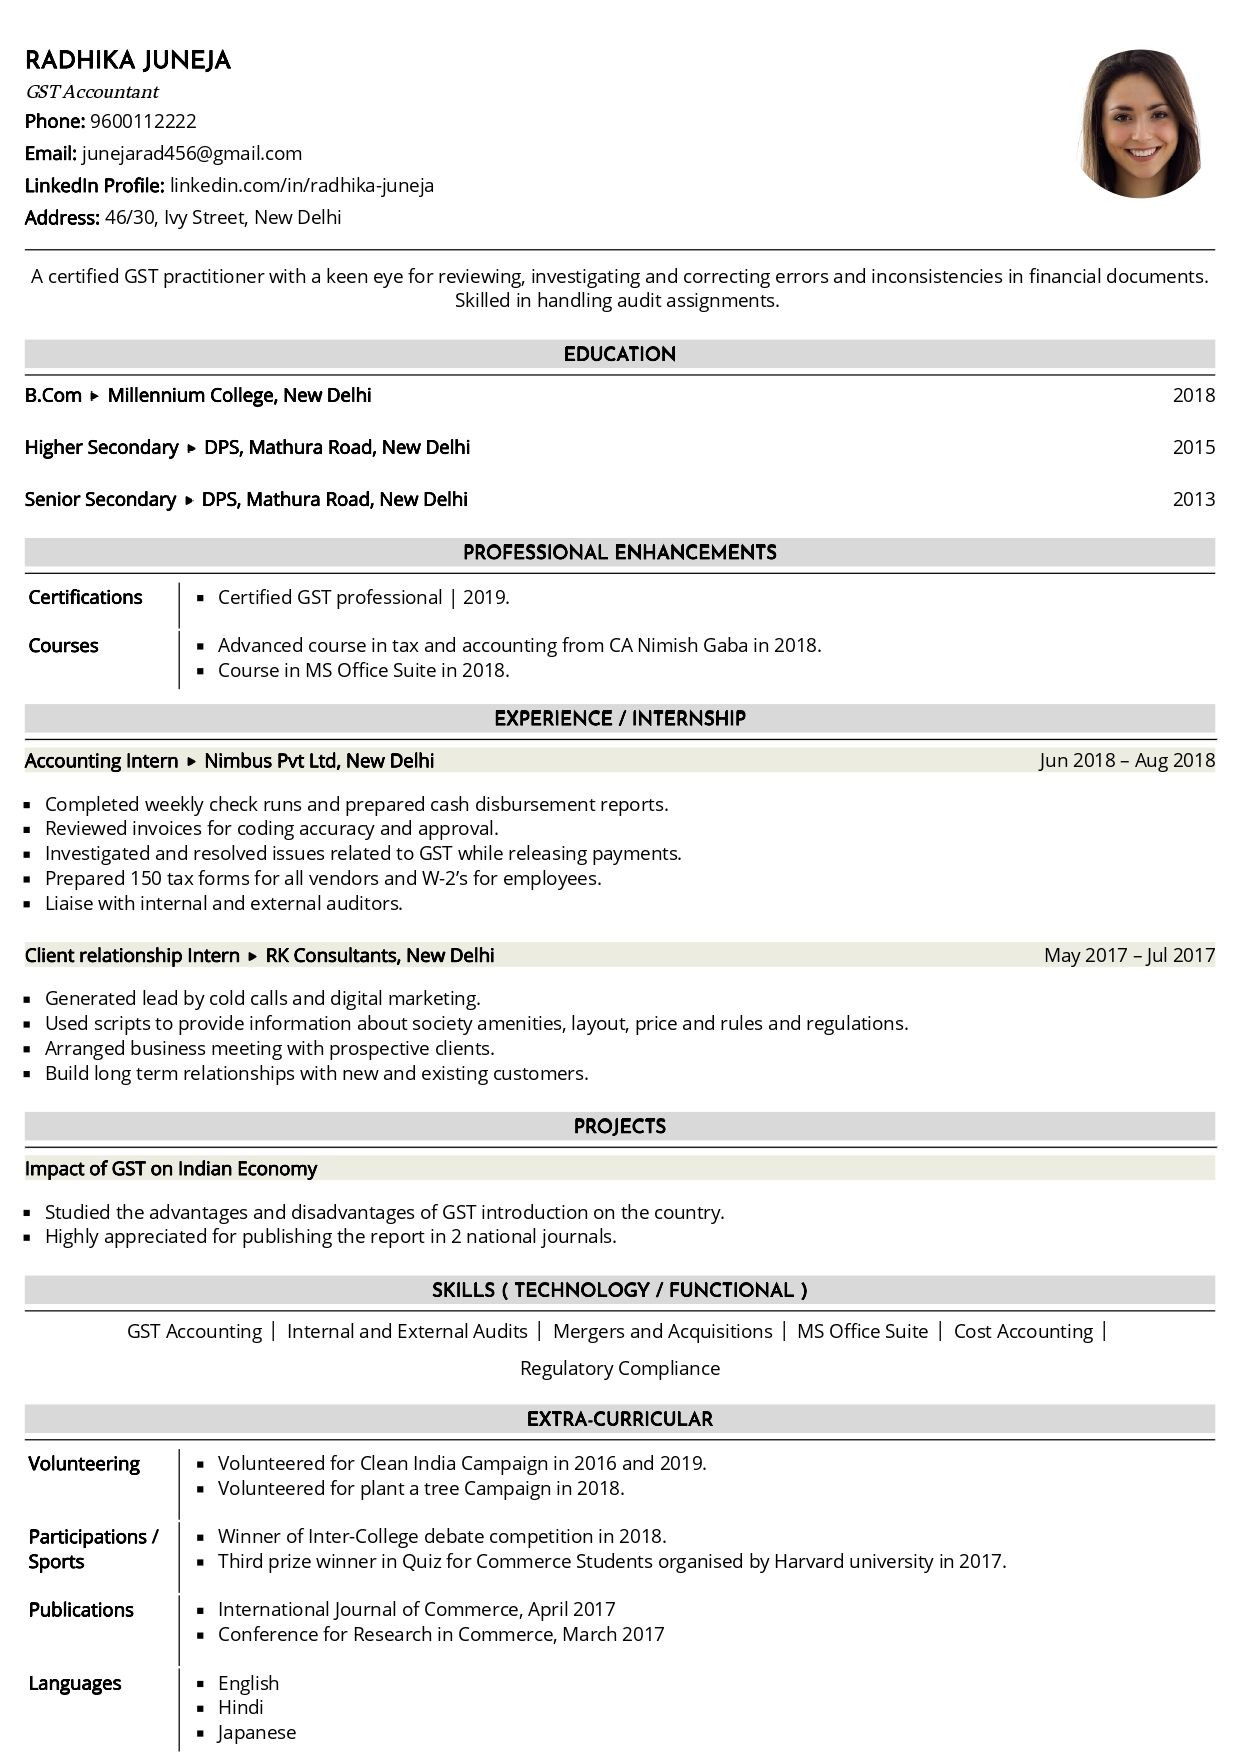 Released College Resume Samples for High School Senior Writing A Resume for Commerce Student [4 Examples]